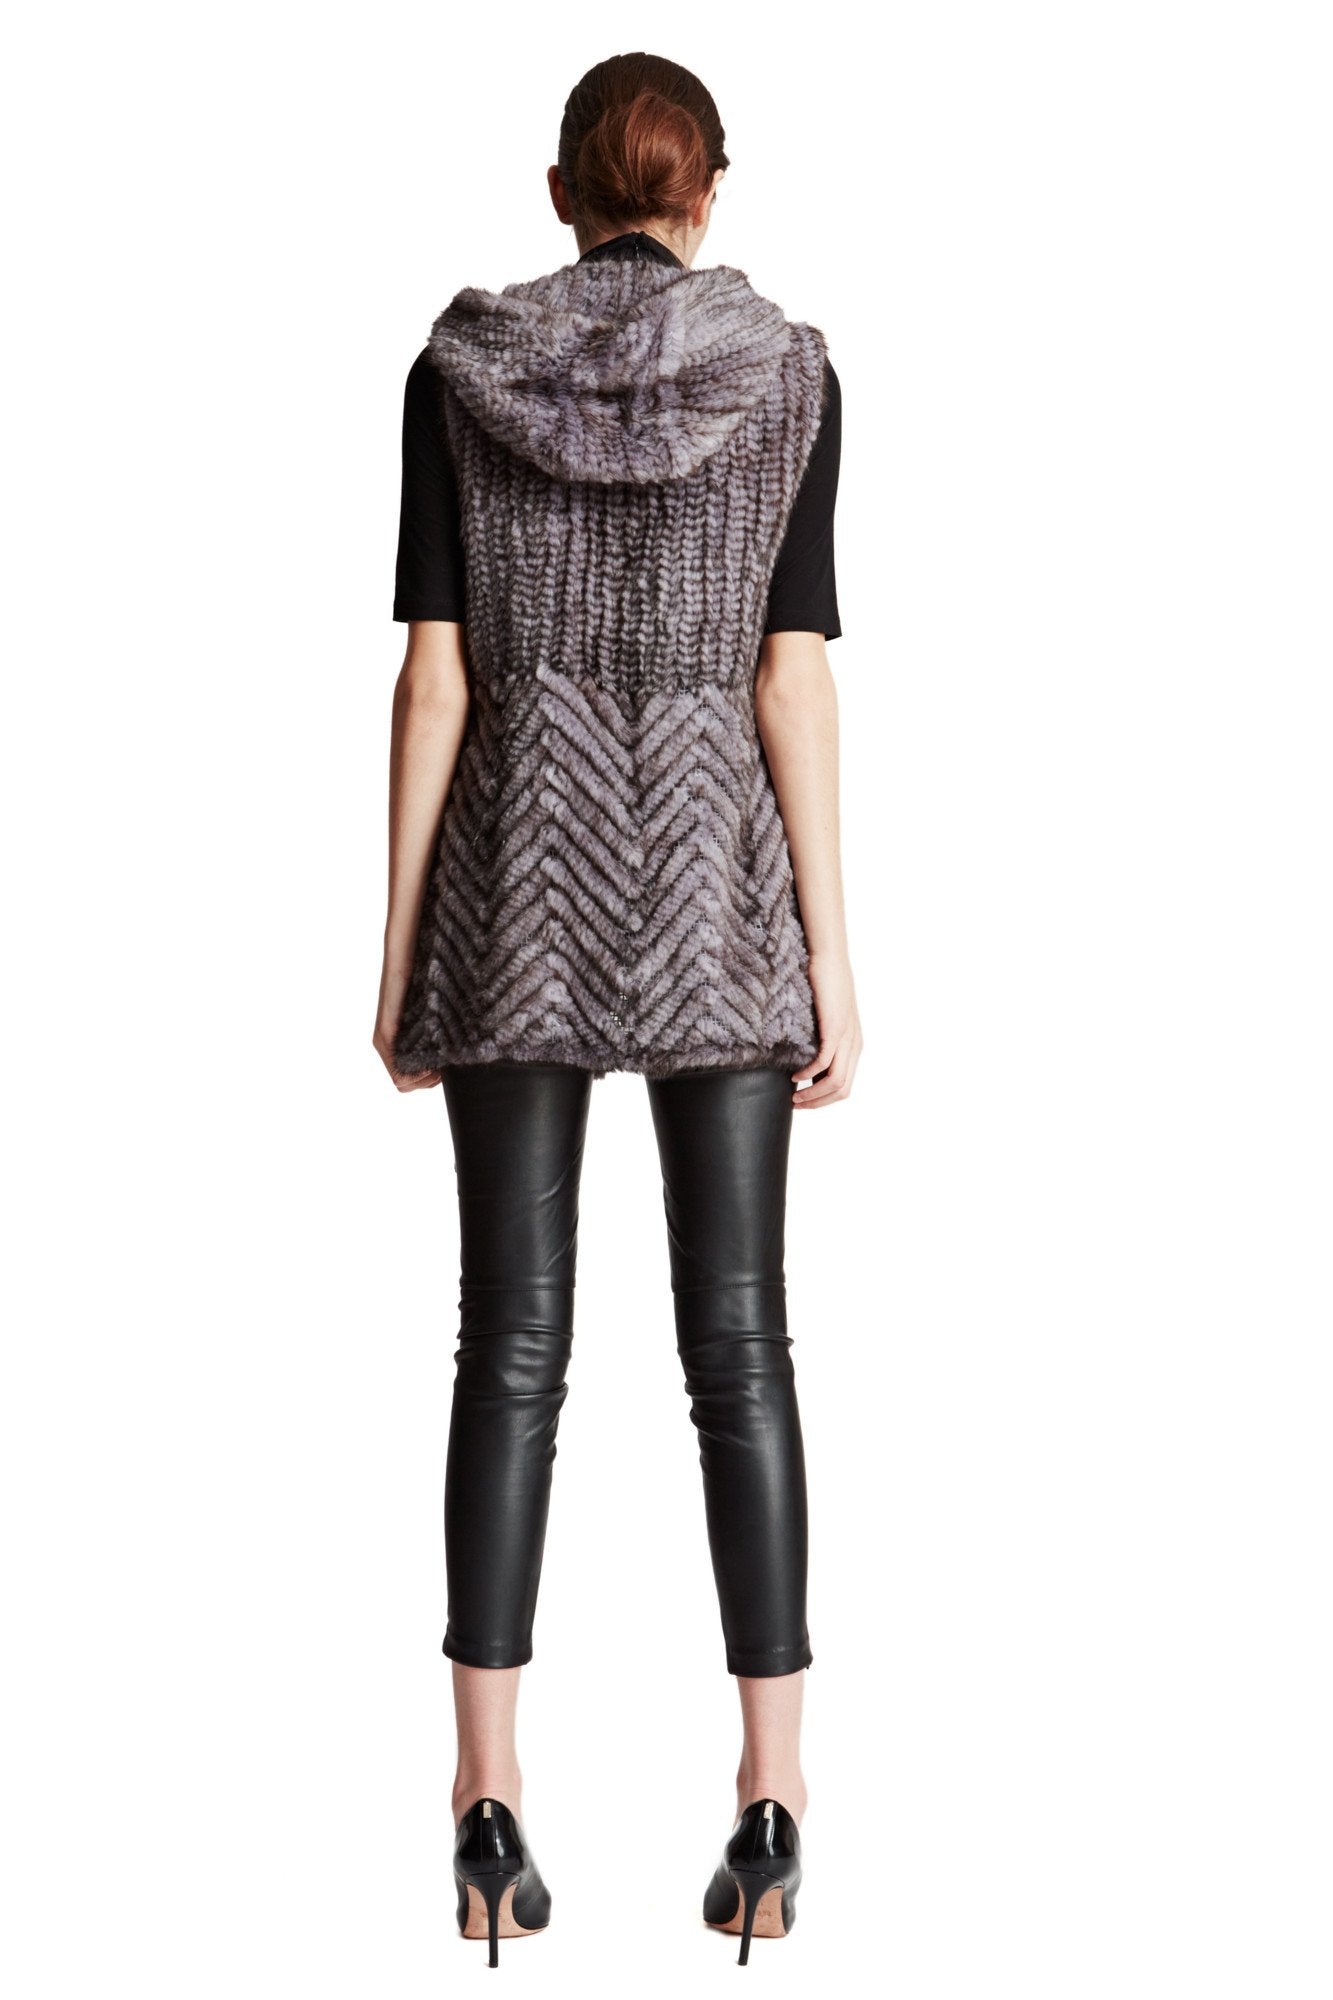 THE LOOE - Knitted Mink Fur Vest with Chevron Panel and Hood - paulamariecollection